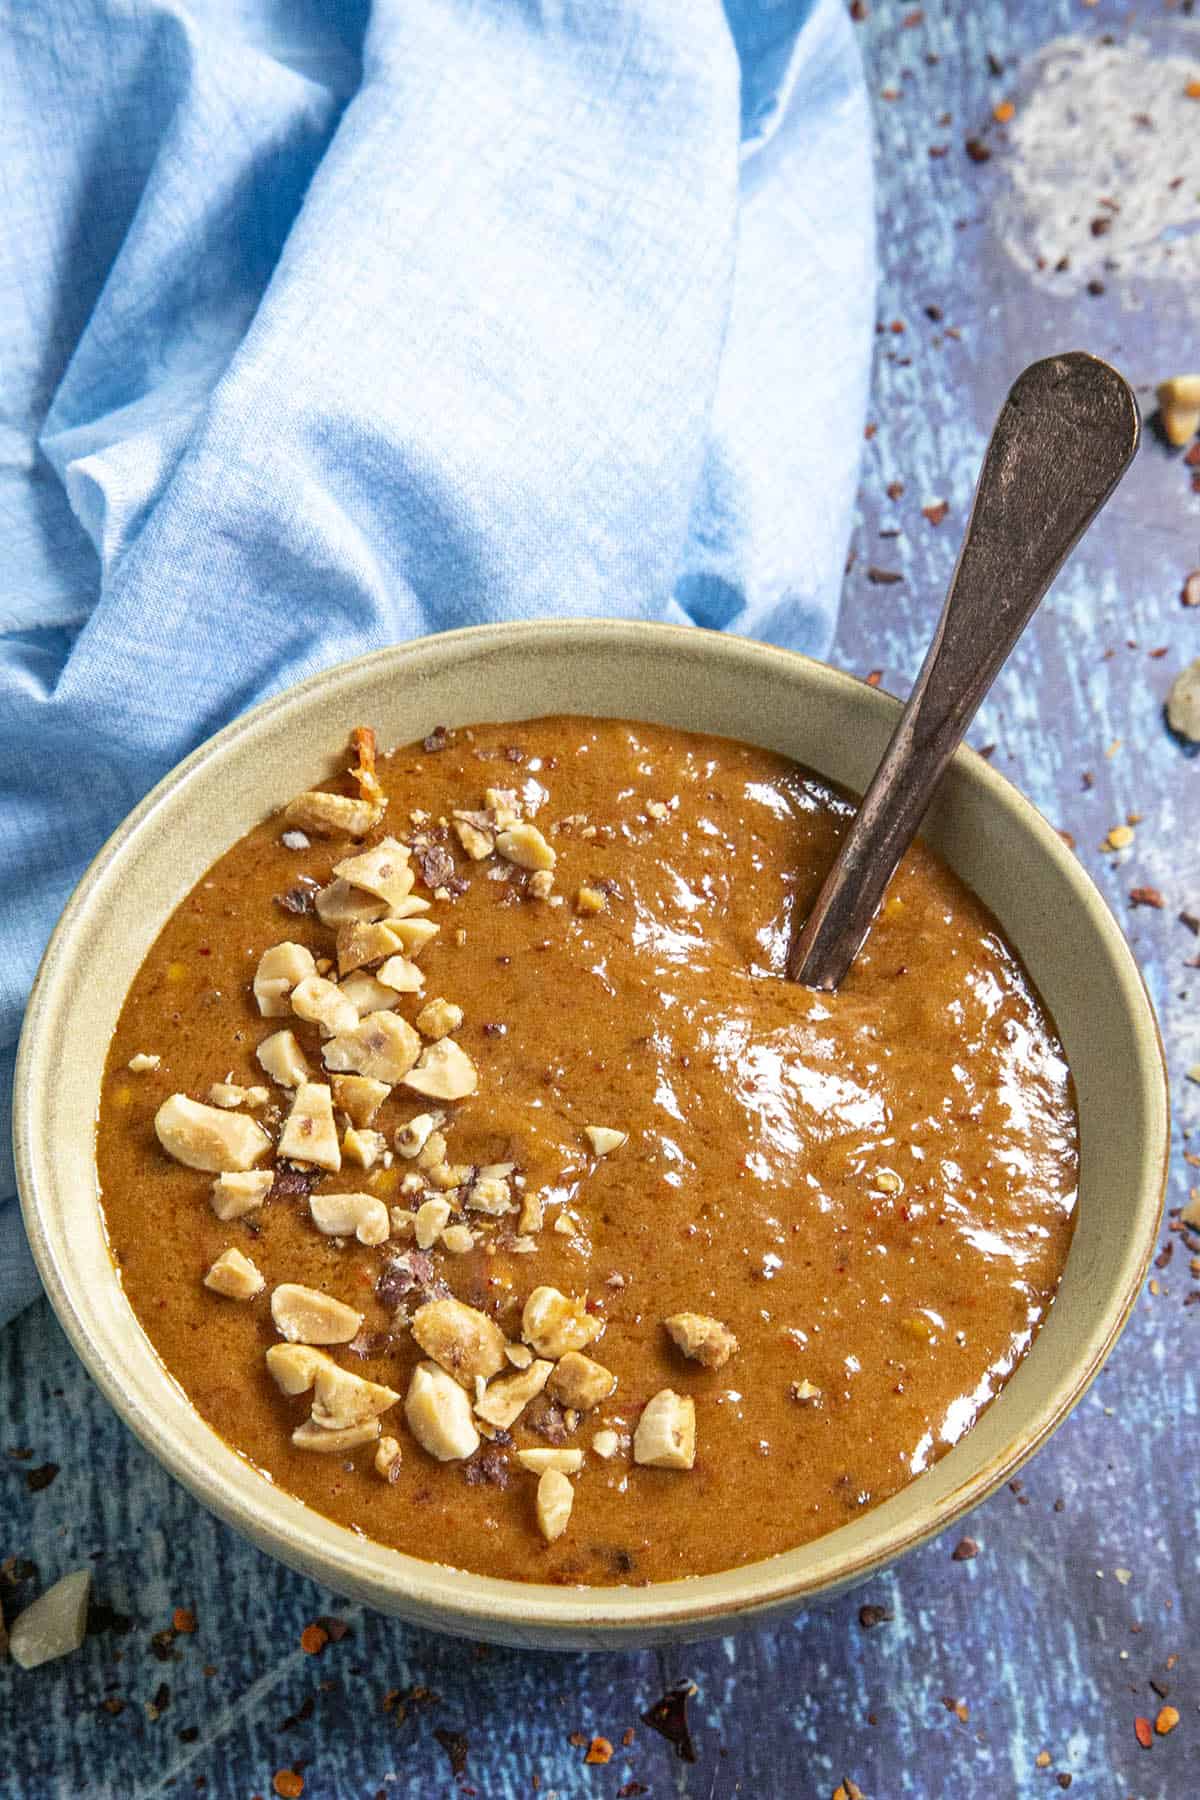 Creamy Thai Peanut Sauce in a bowl with peanuts